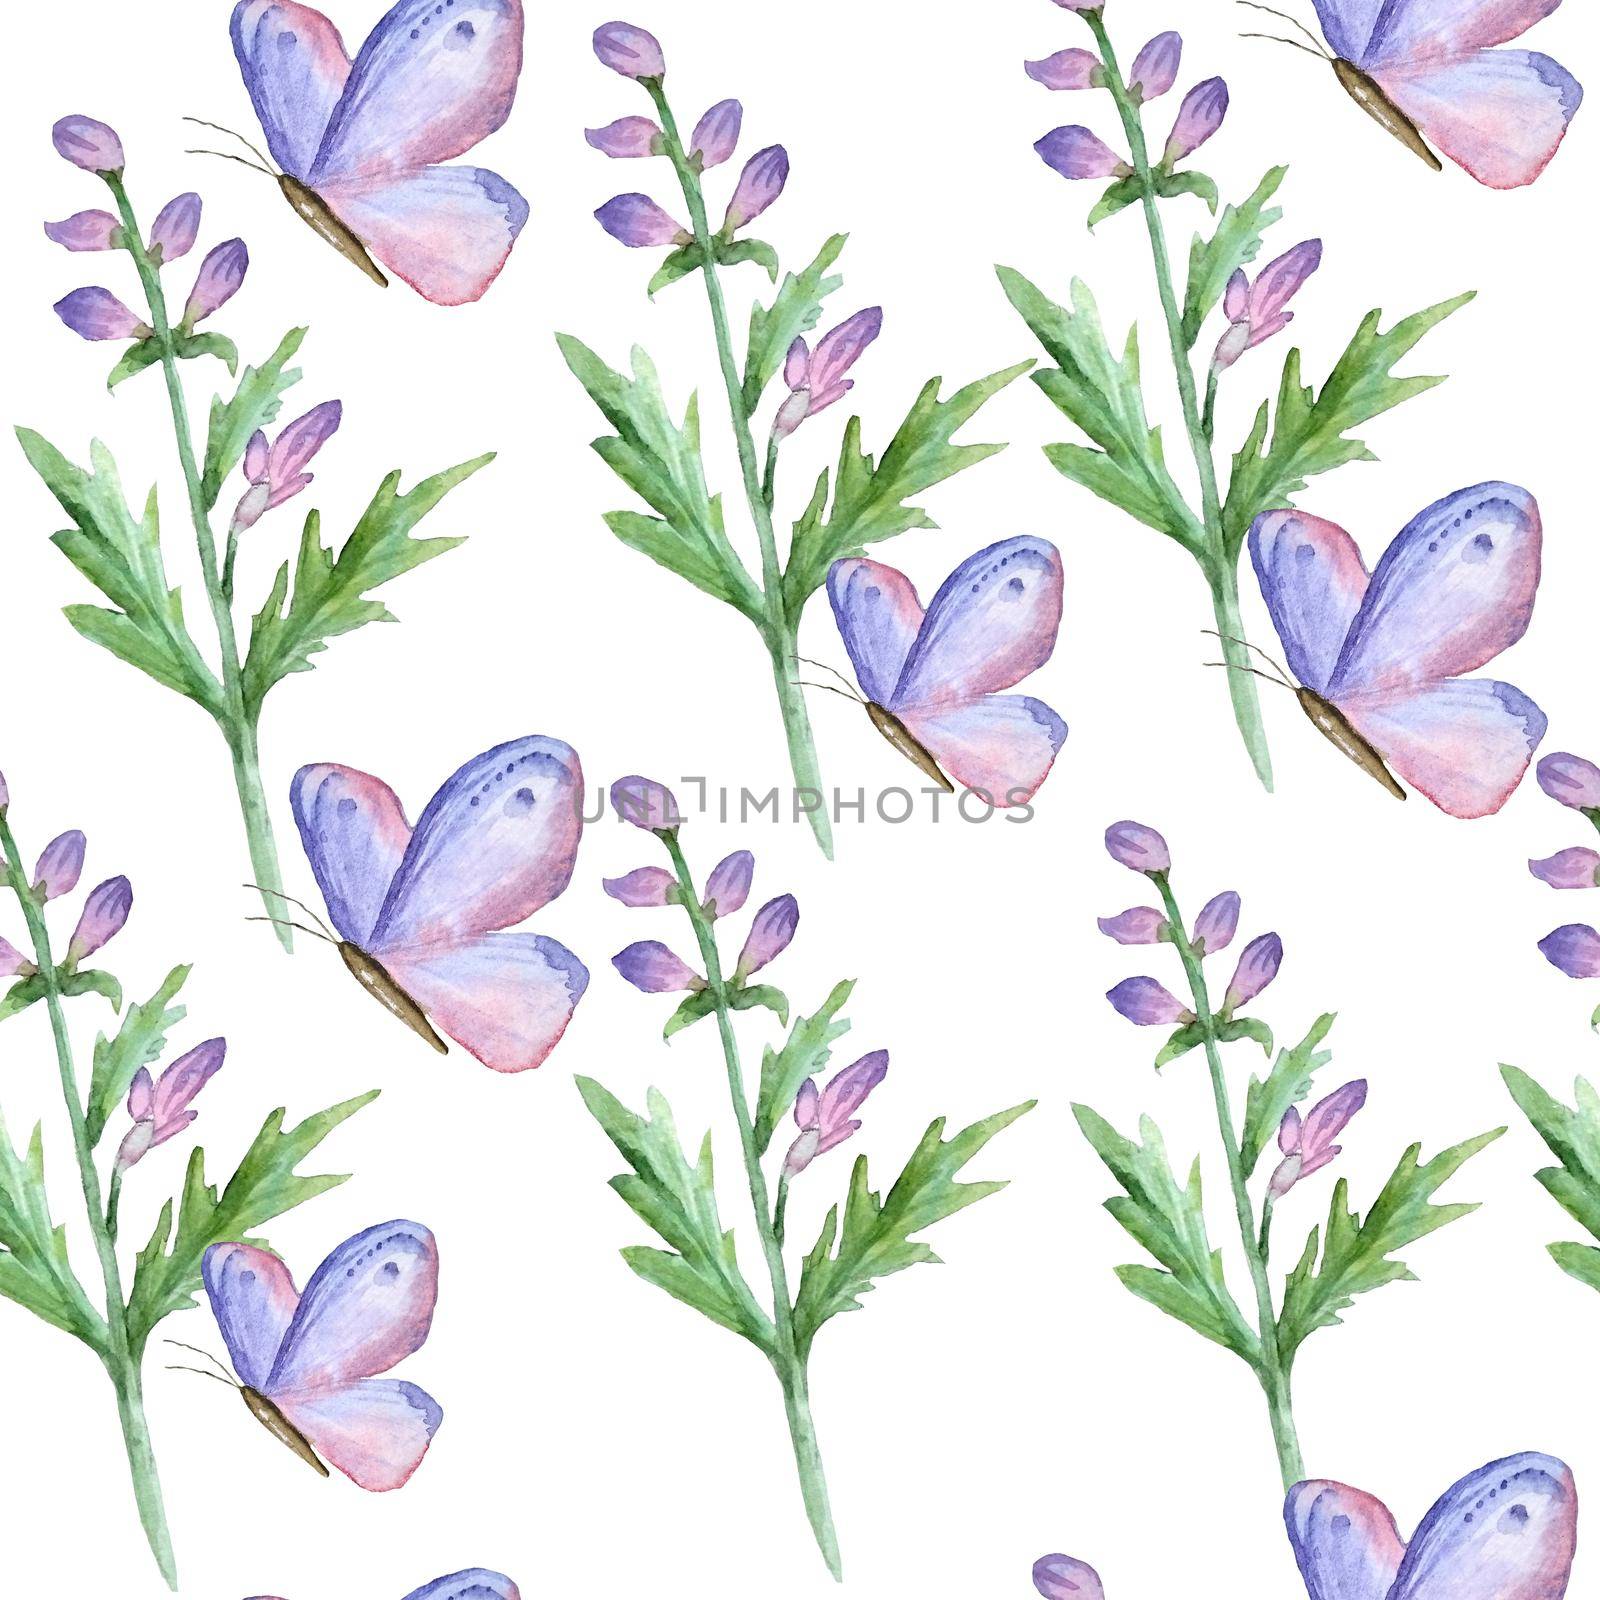 Watercolor seamless pattern of wild violet pink flowers leaves butterflies. Spring forest wood floral neutral nature design for textile wallpaper wedding invitation. Seasonal vintage romantic background. by Lagmar